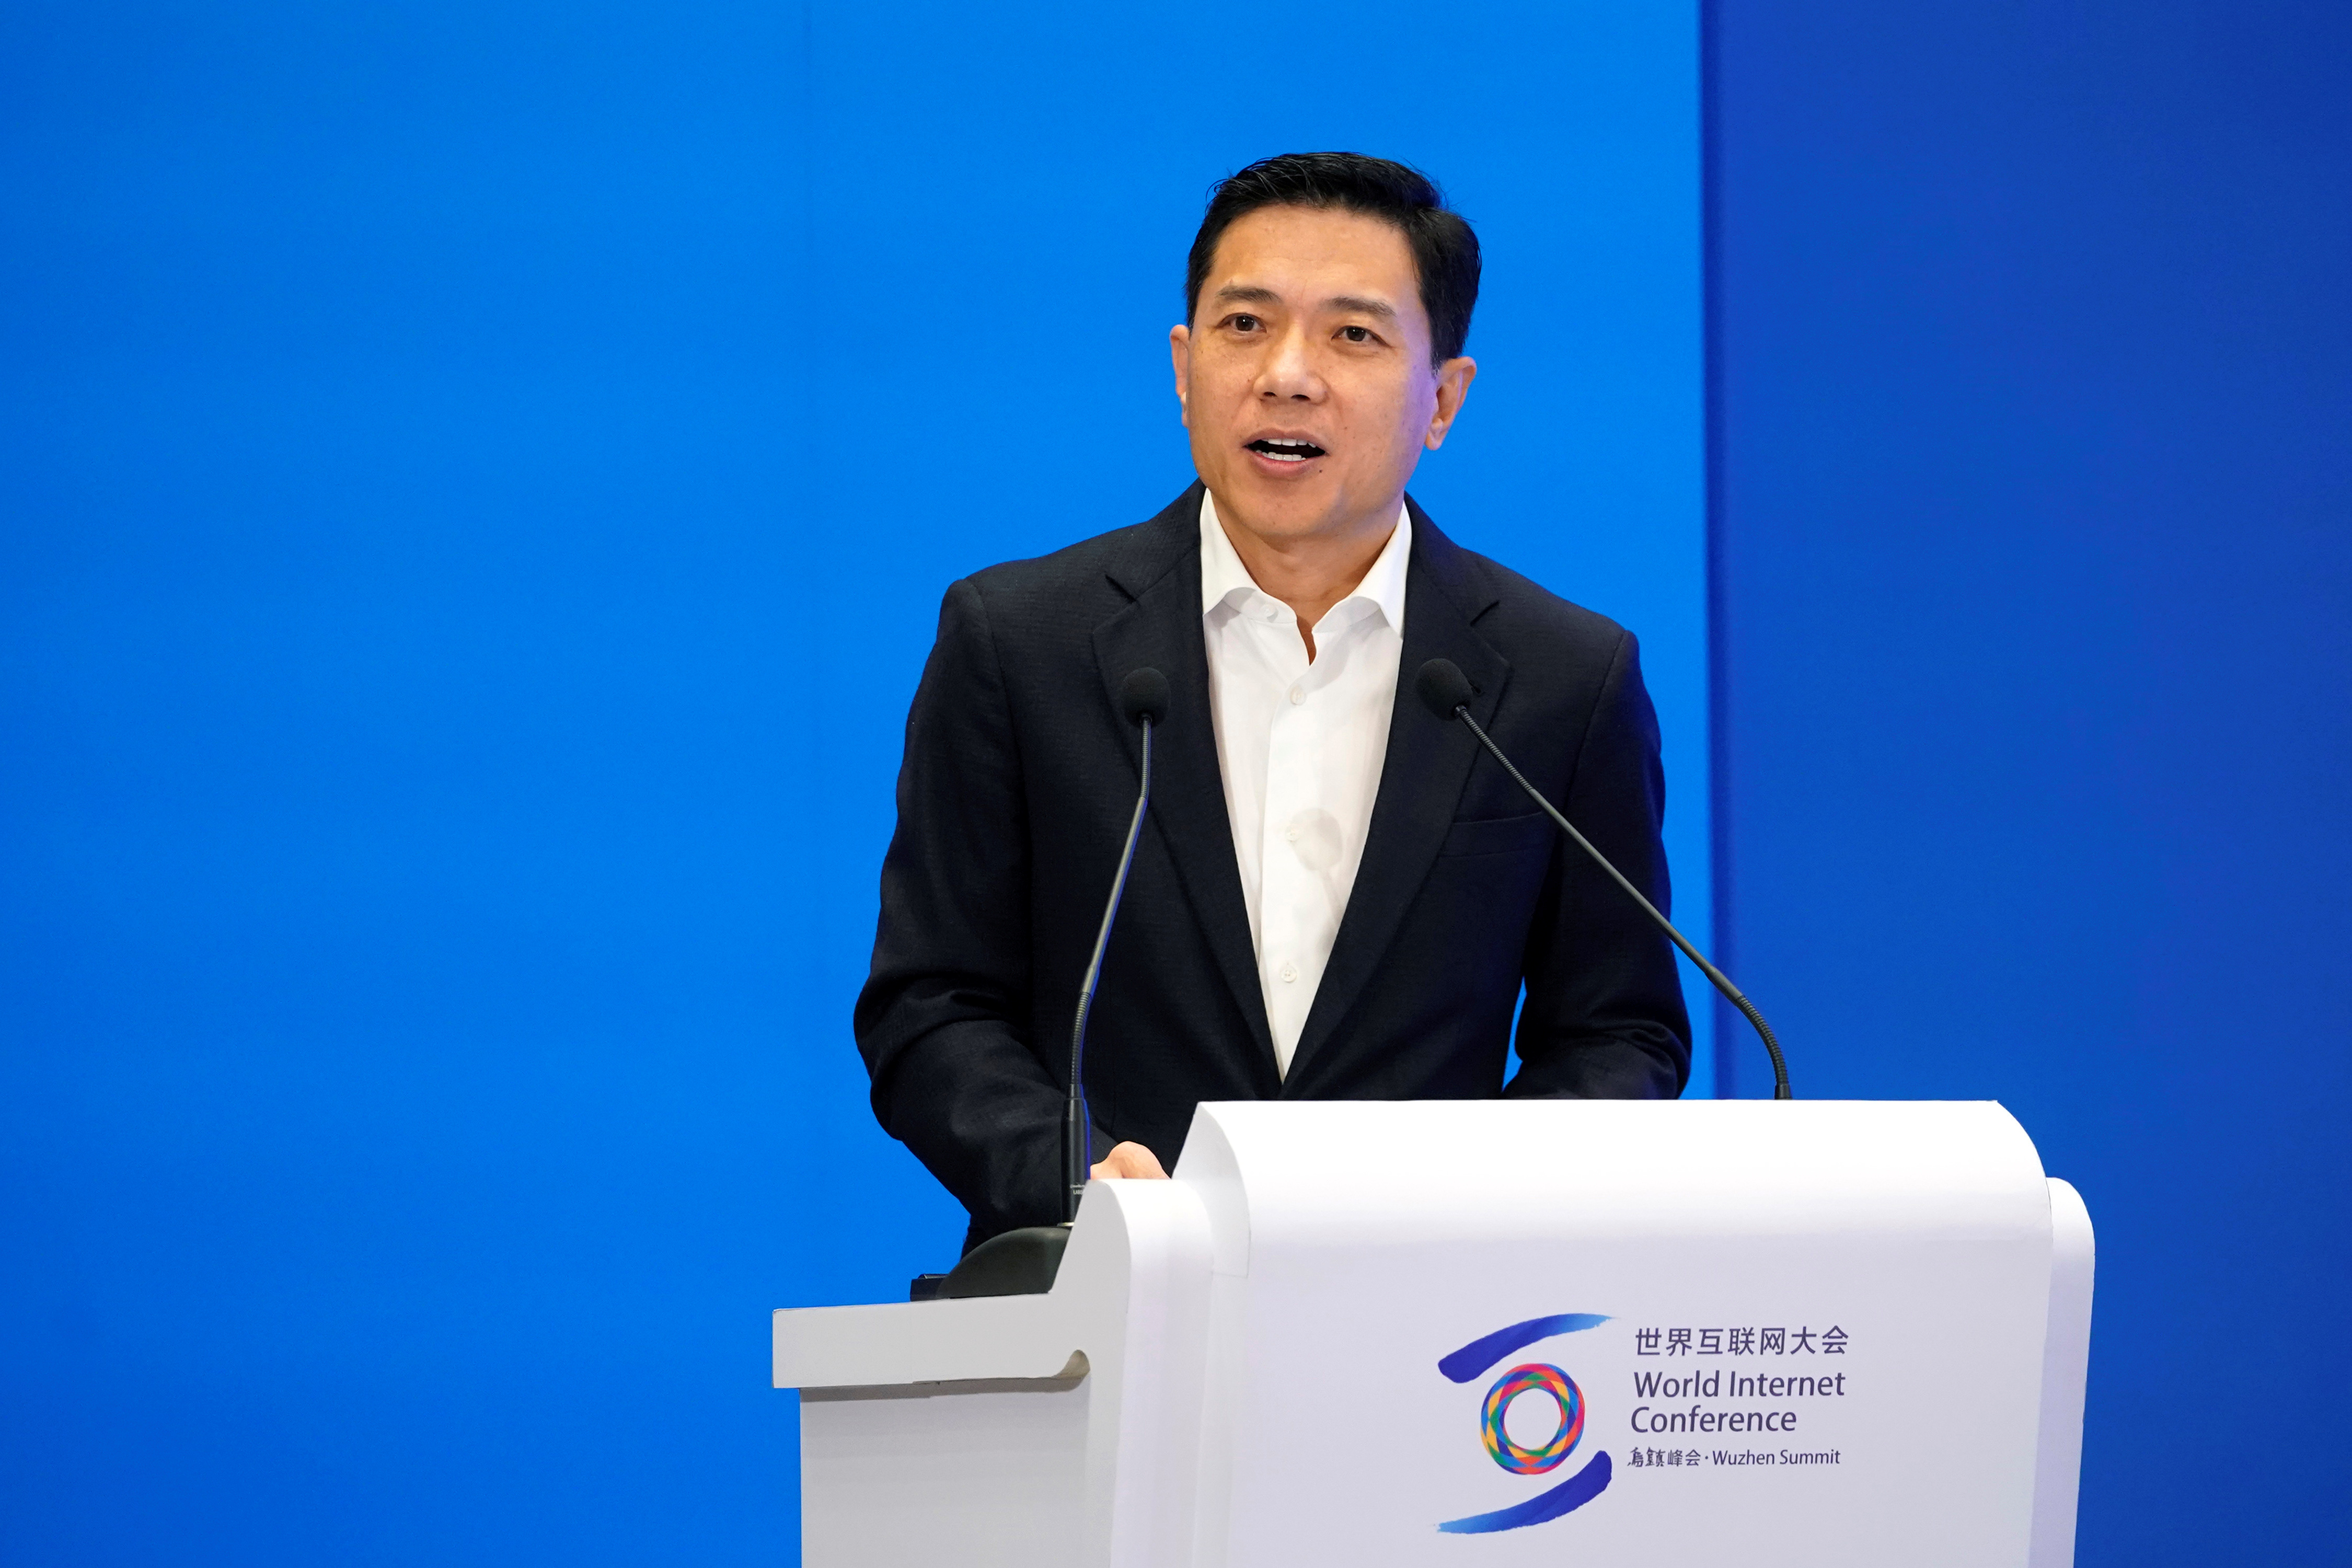 Baidu's co-founder and CEO Robin Li speaks during the fifth World Internet Conference (WIC) in Wuzhen